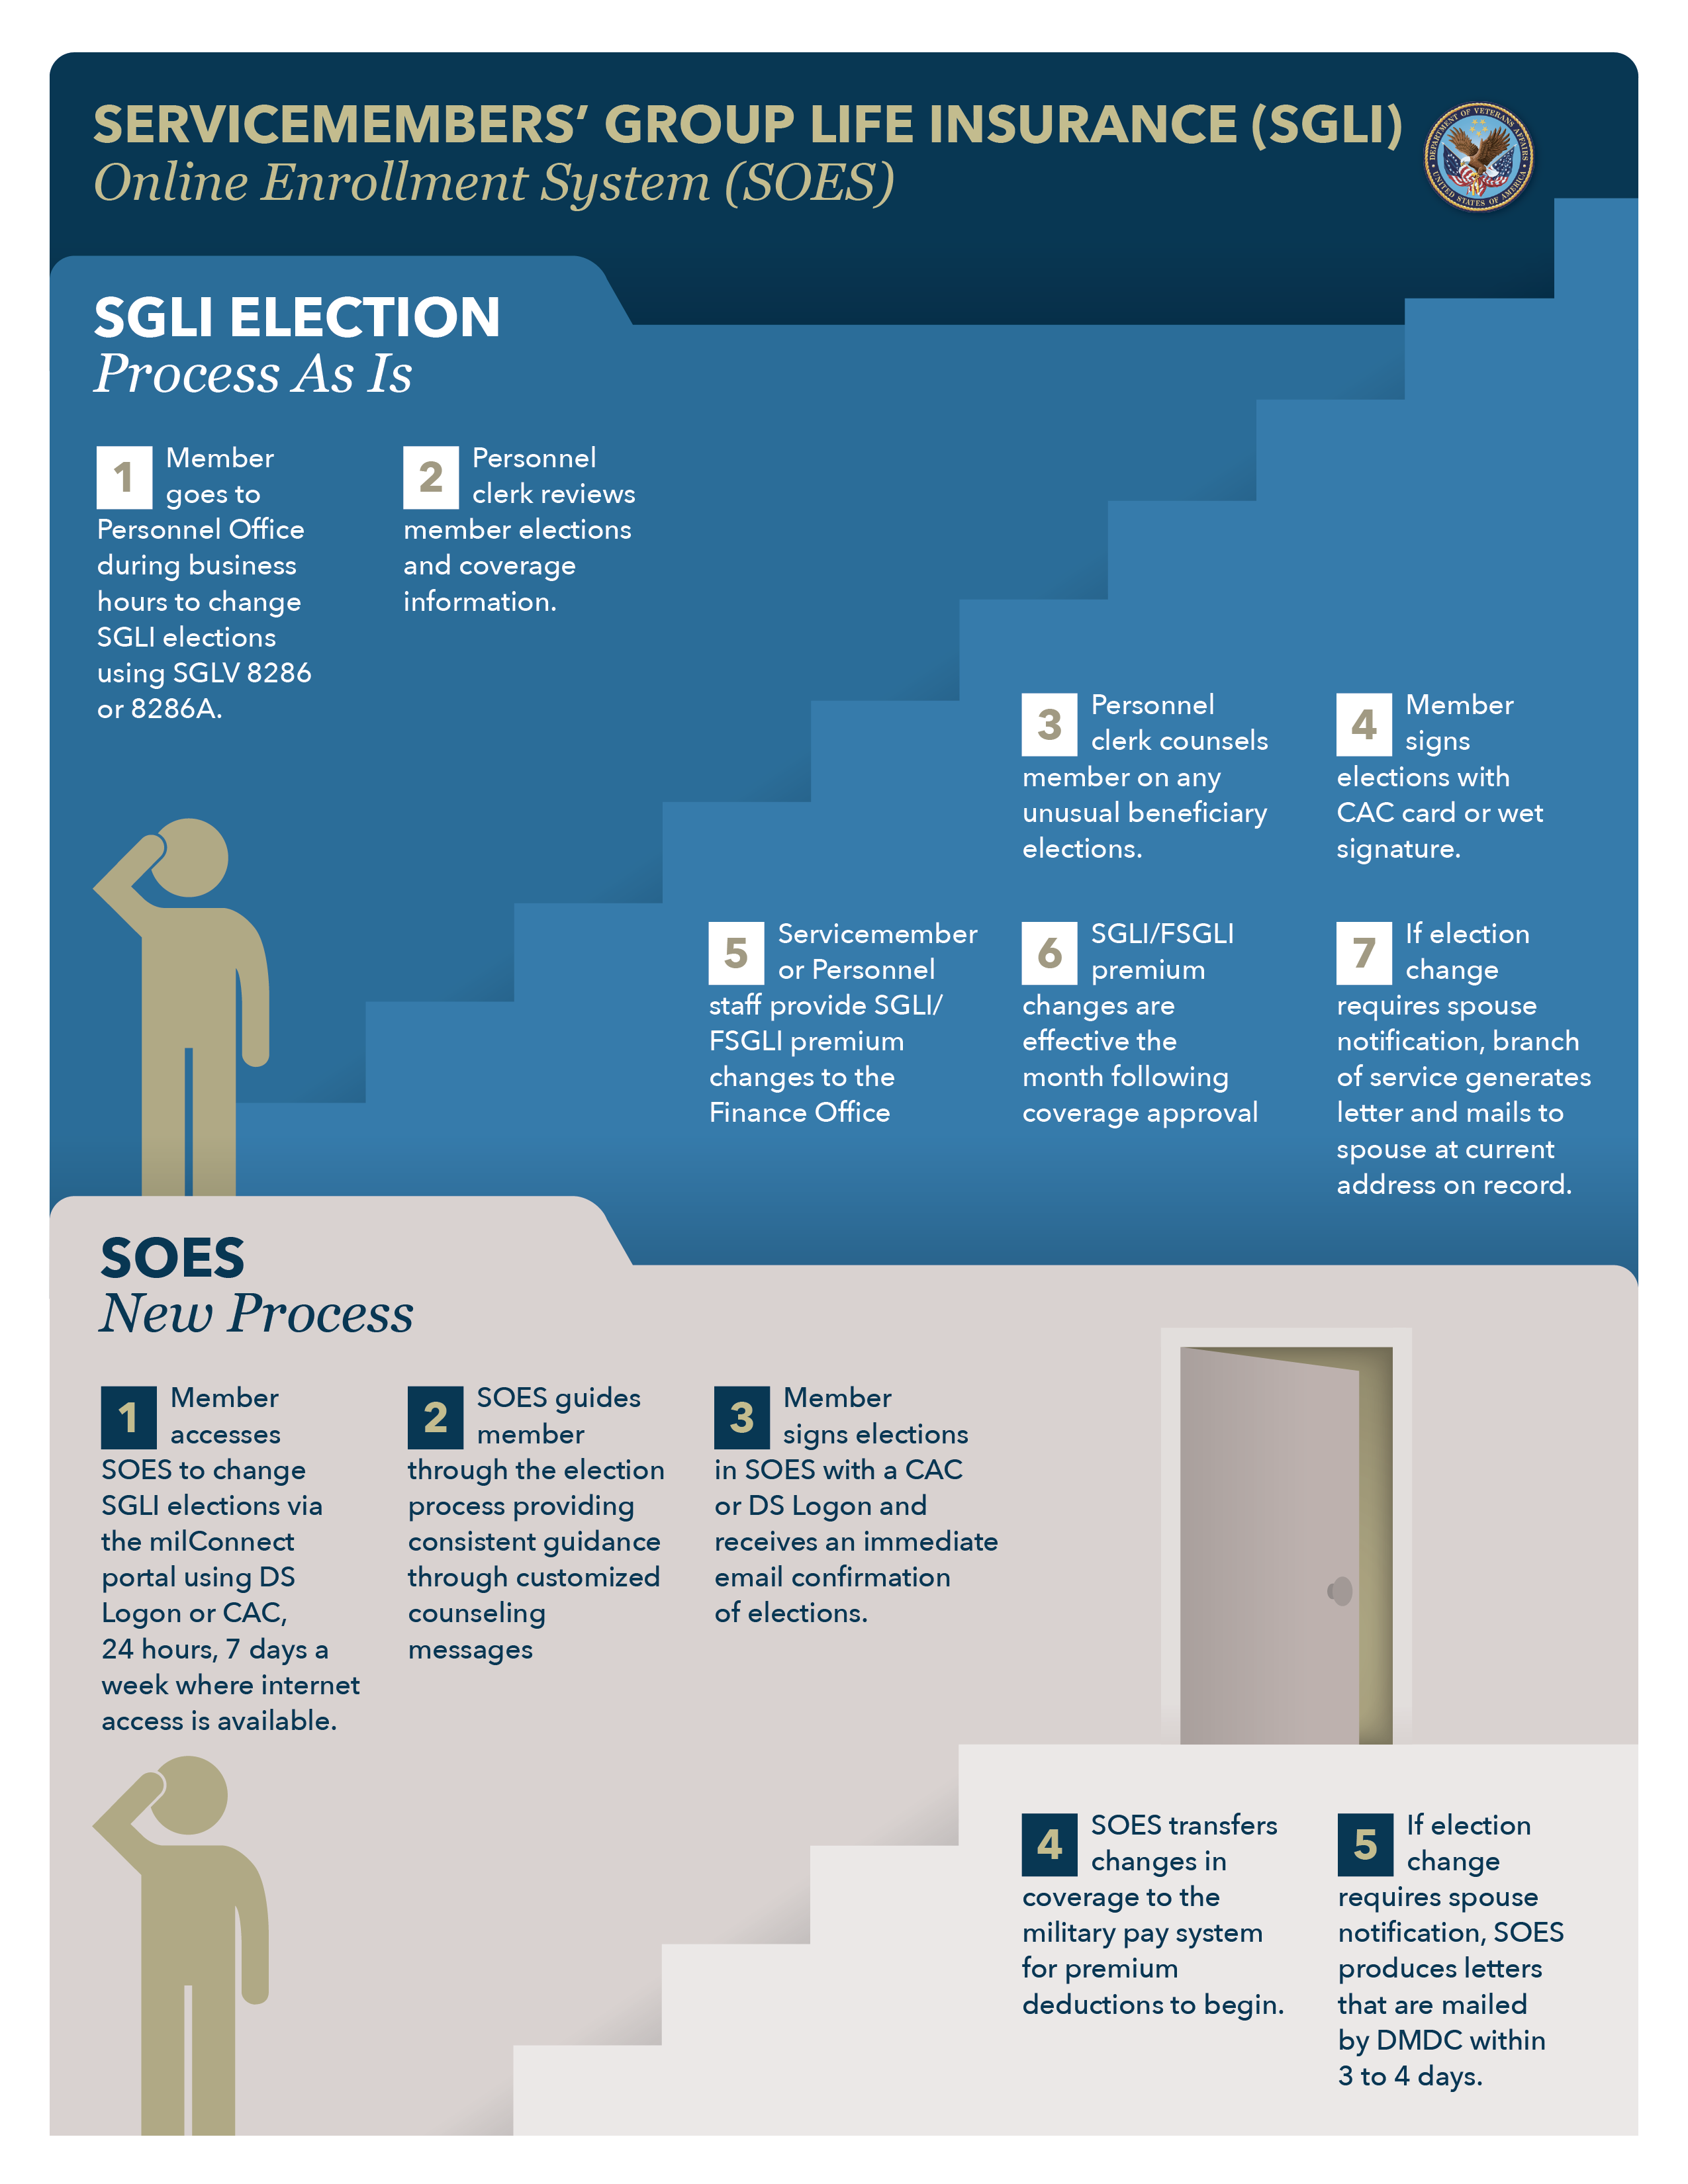 Follow this link for an easy to understand picture of the SGLI election process before and after SOES implementation SGLI provides automatic life insurance